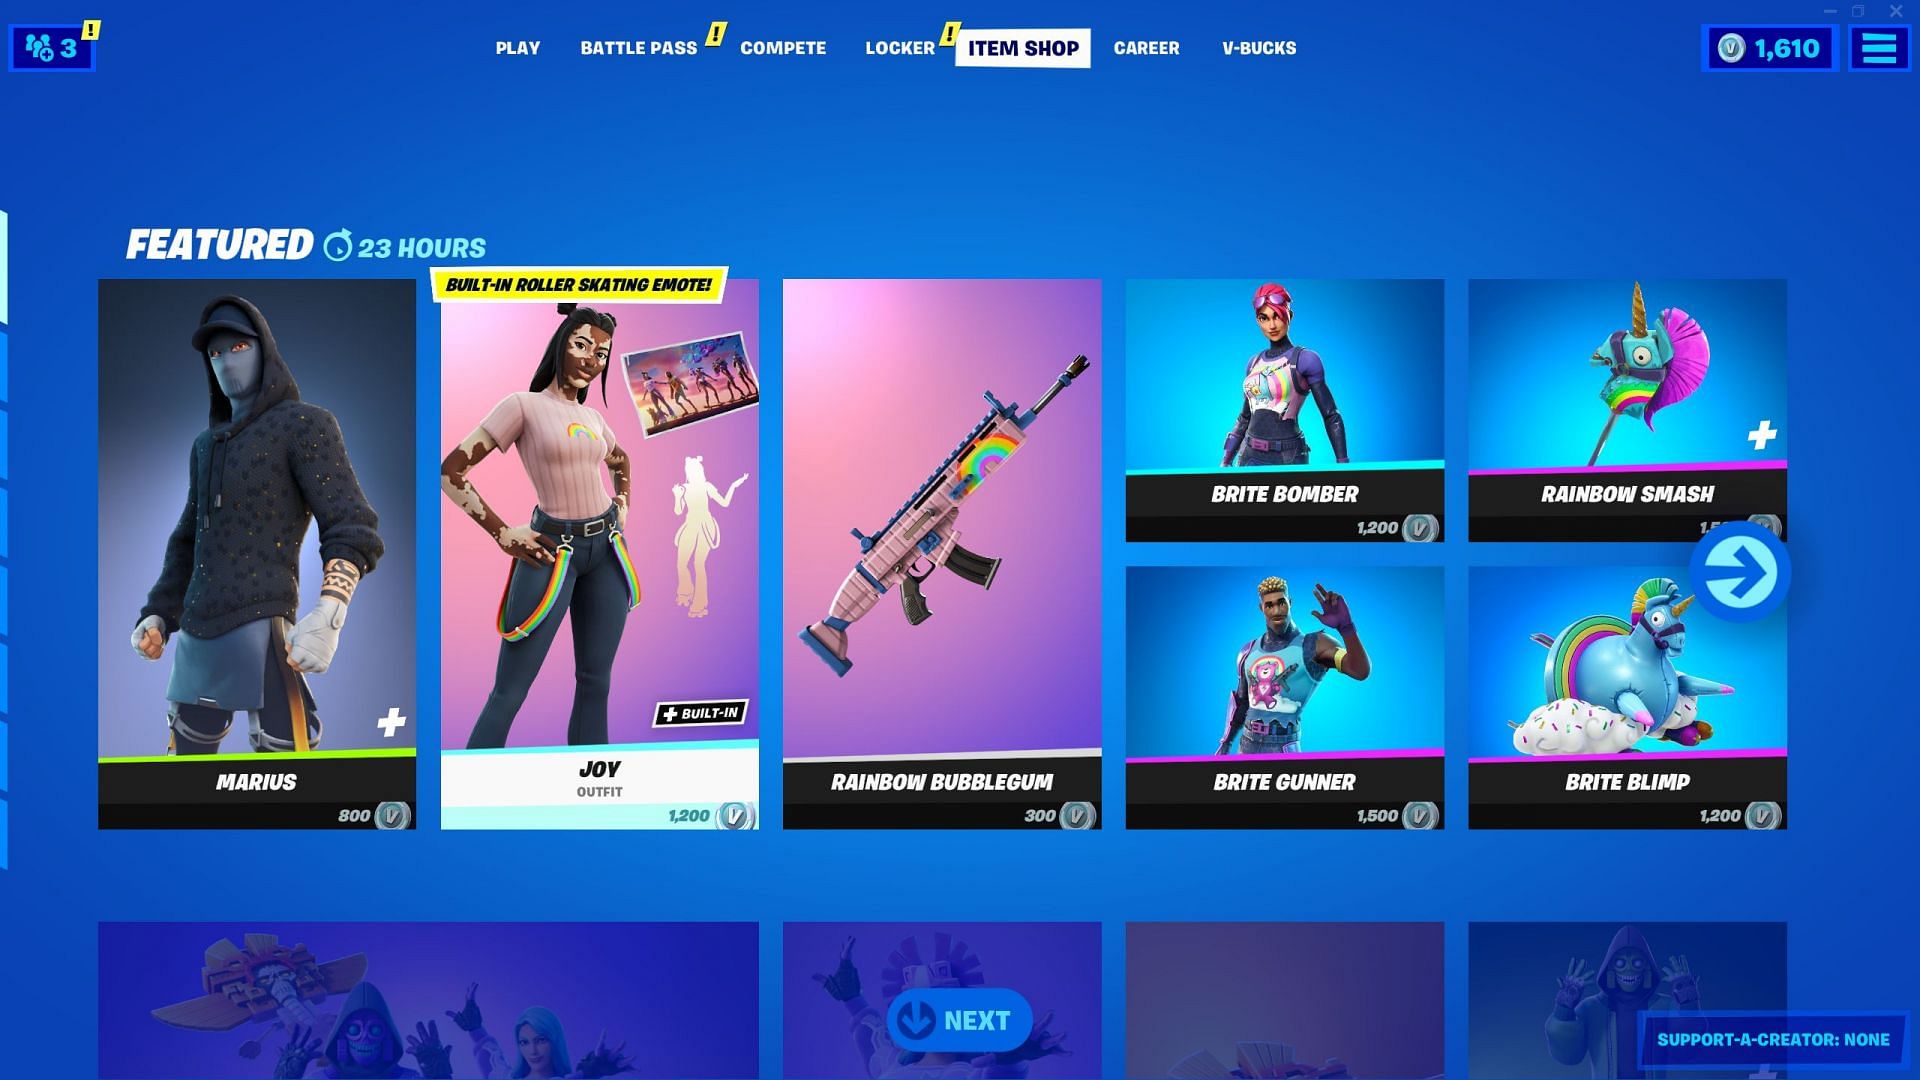 kuvert ejendom hver for sig How much would it cost to buy every single Fortnite cosmetic item from the  Item Shop?